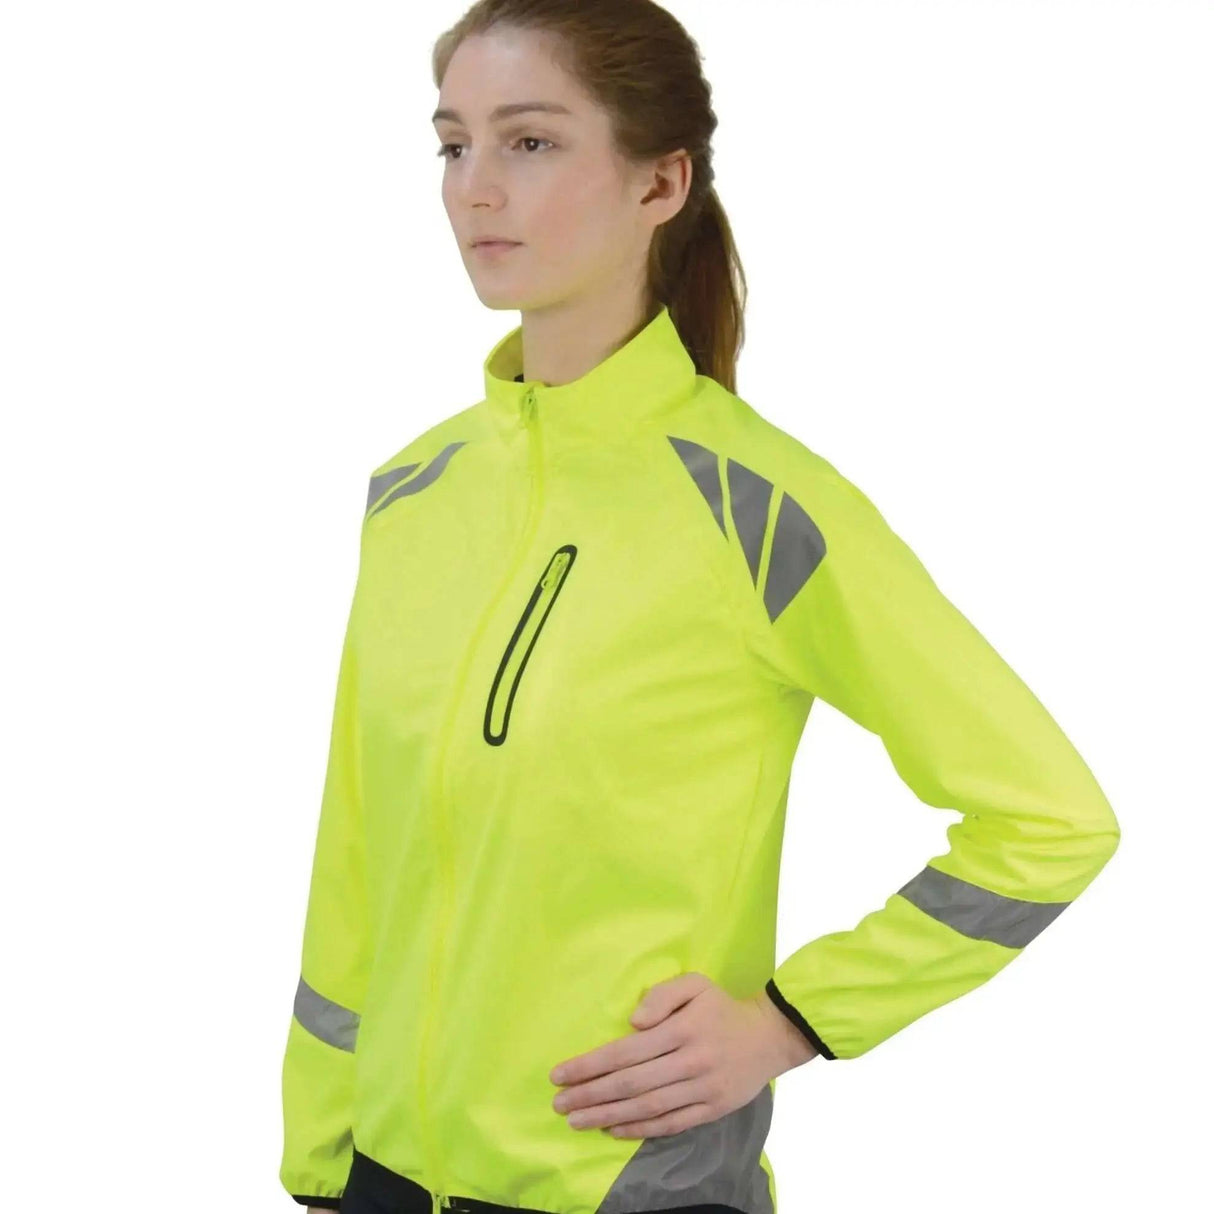 Reflector Jacket by Hy Equestrian Outdoor Coats & Jackets Yellow X Small Barnstaple Equestrian Supplies